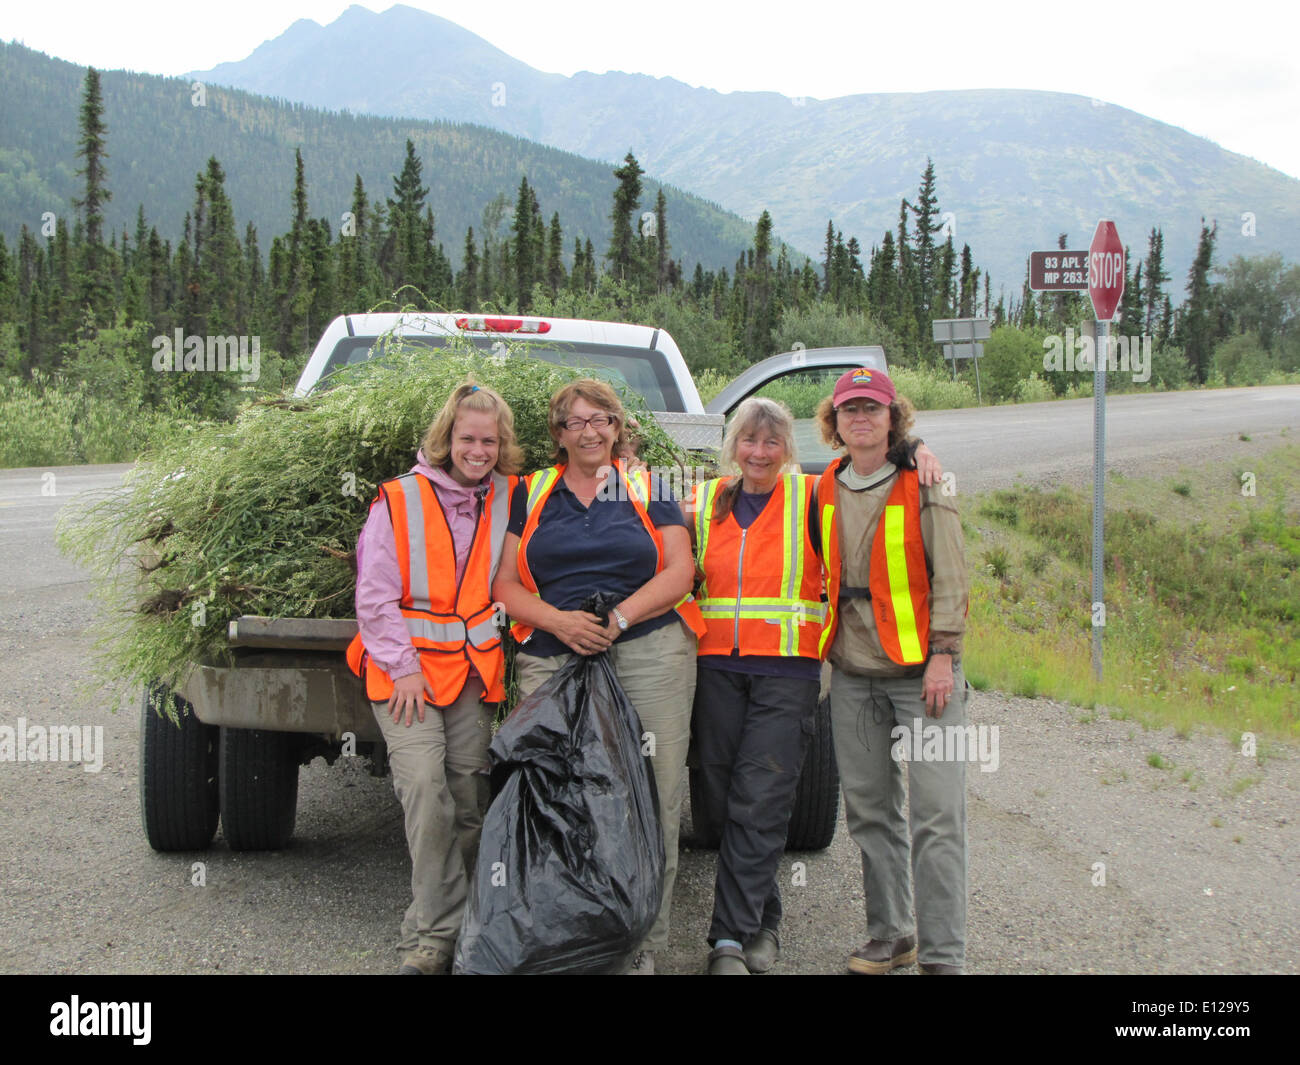 Truck loads of white sweetclover was pulled throughout the week. Feels good at the end of the day! From left, FWS Erin Julianus, Friends volunteers: Joyce Cox, Betty Siegel, and Michelle Michaud Stock Photo